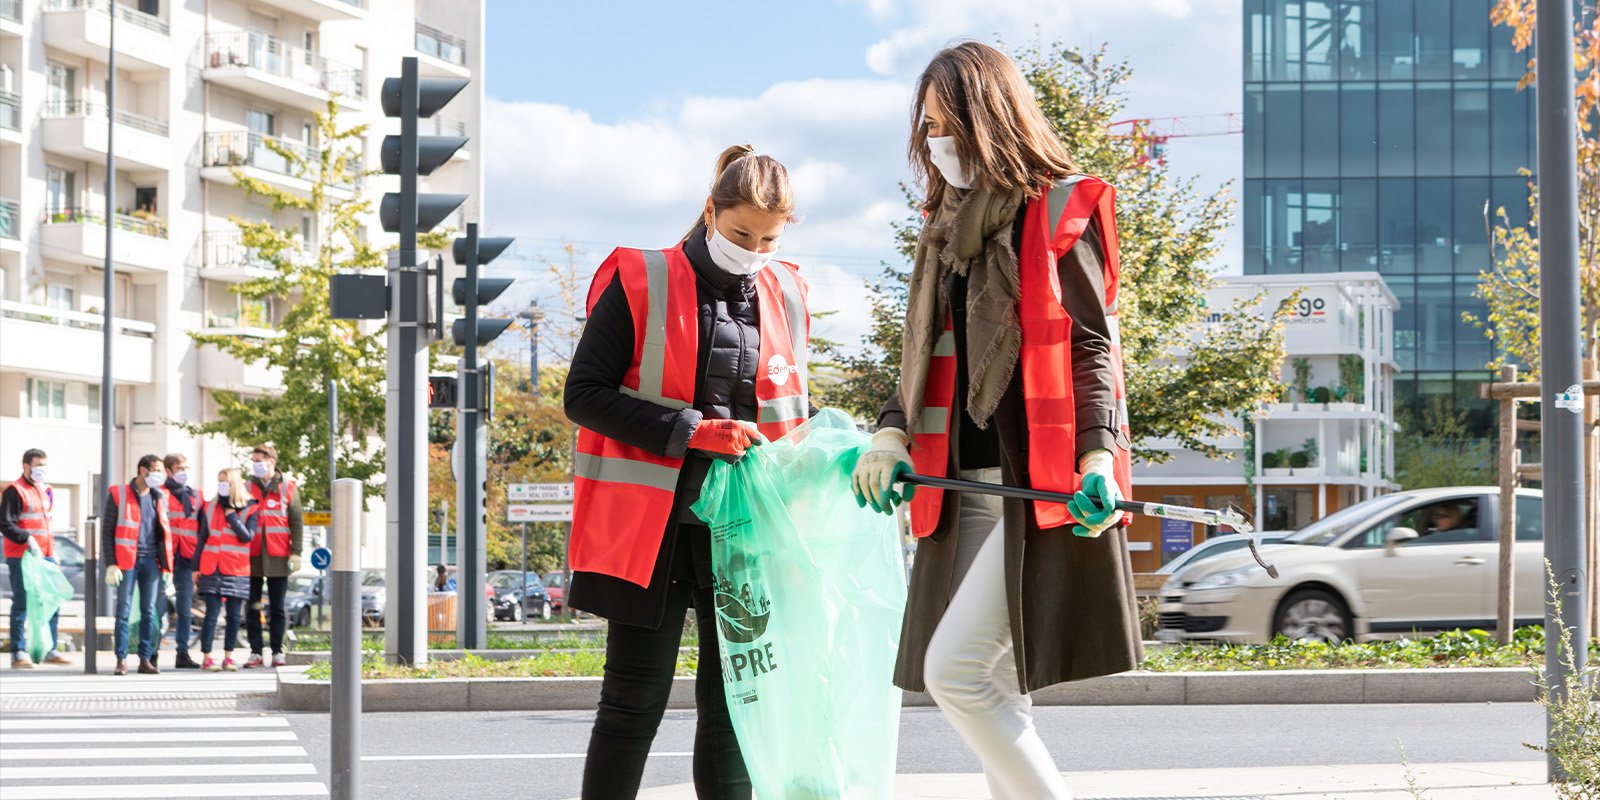 Young women wearing red vests and collecting trash